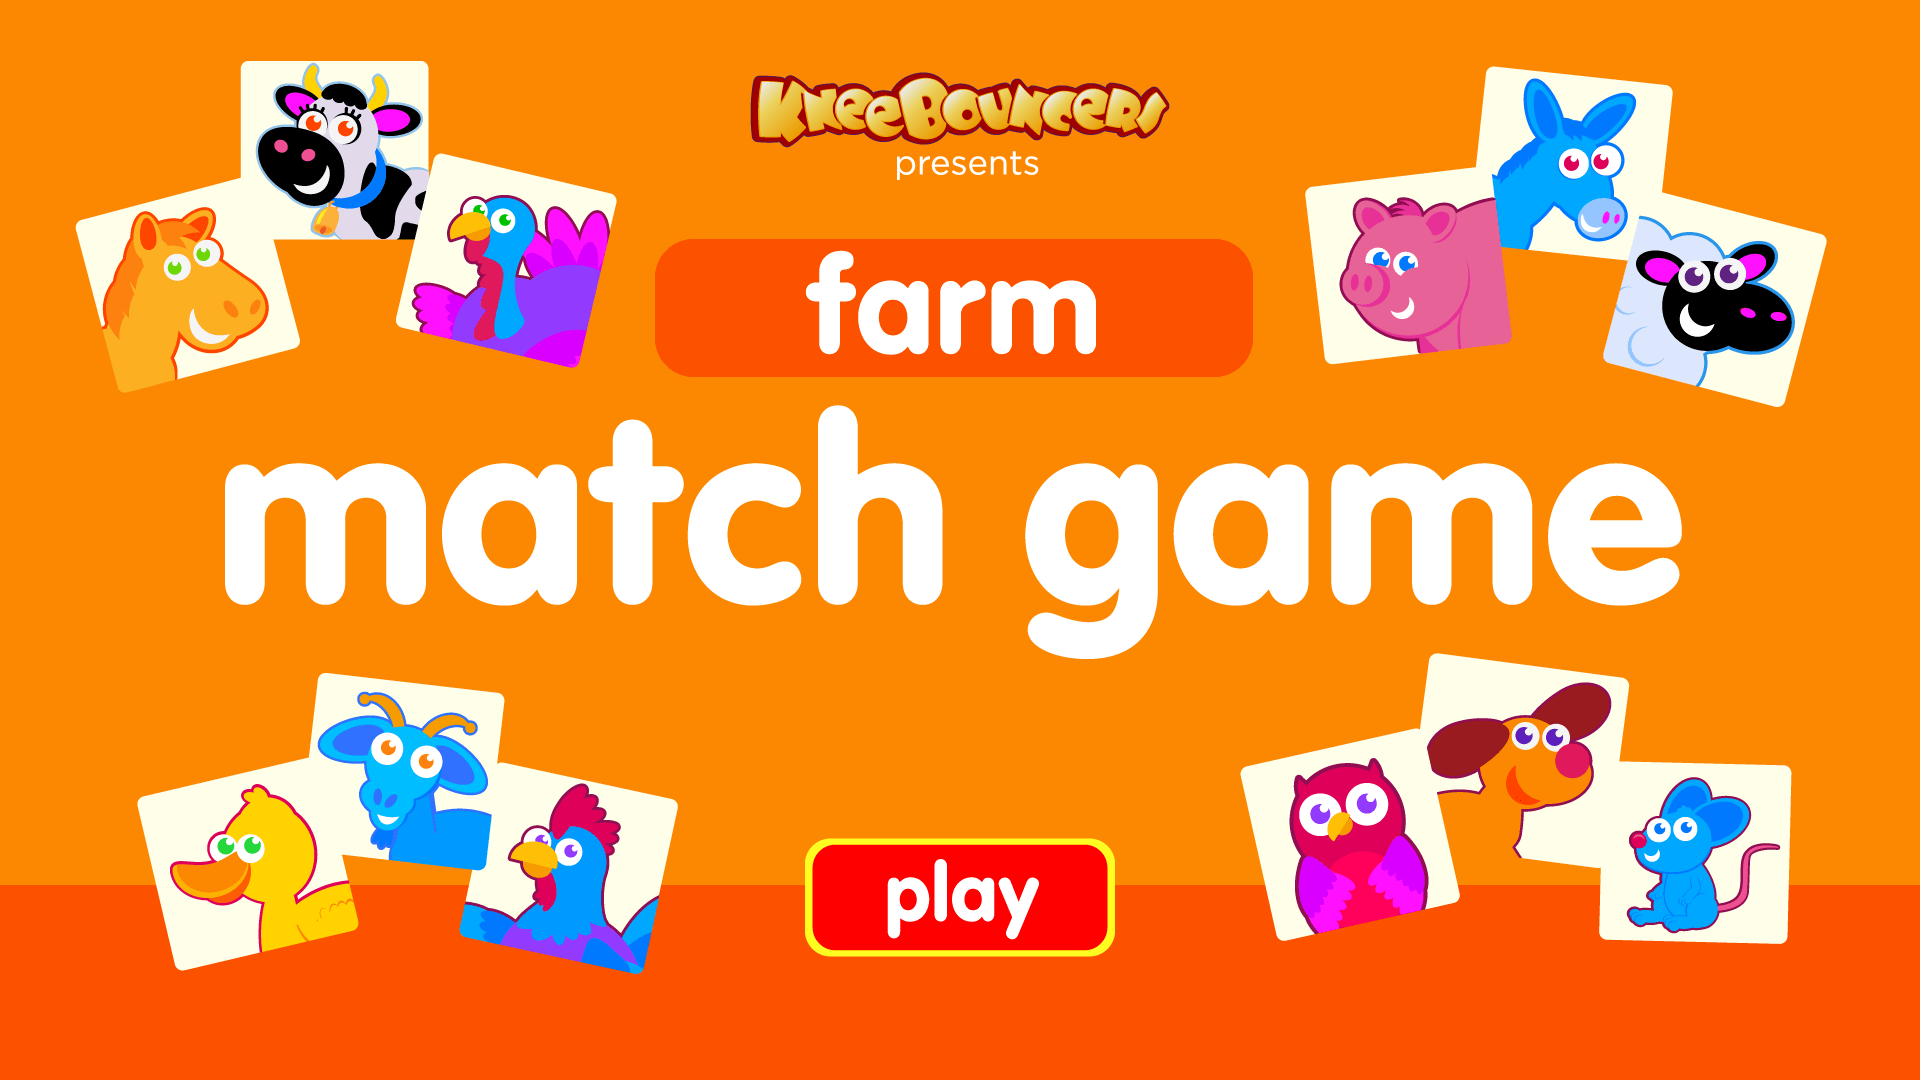 matching game learn farm animals